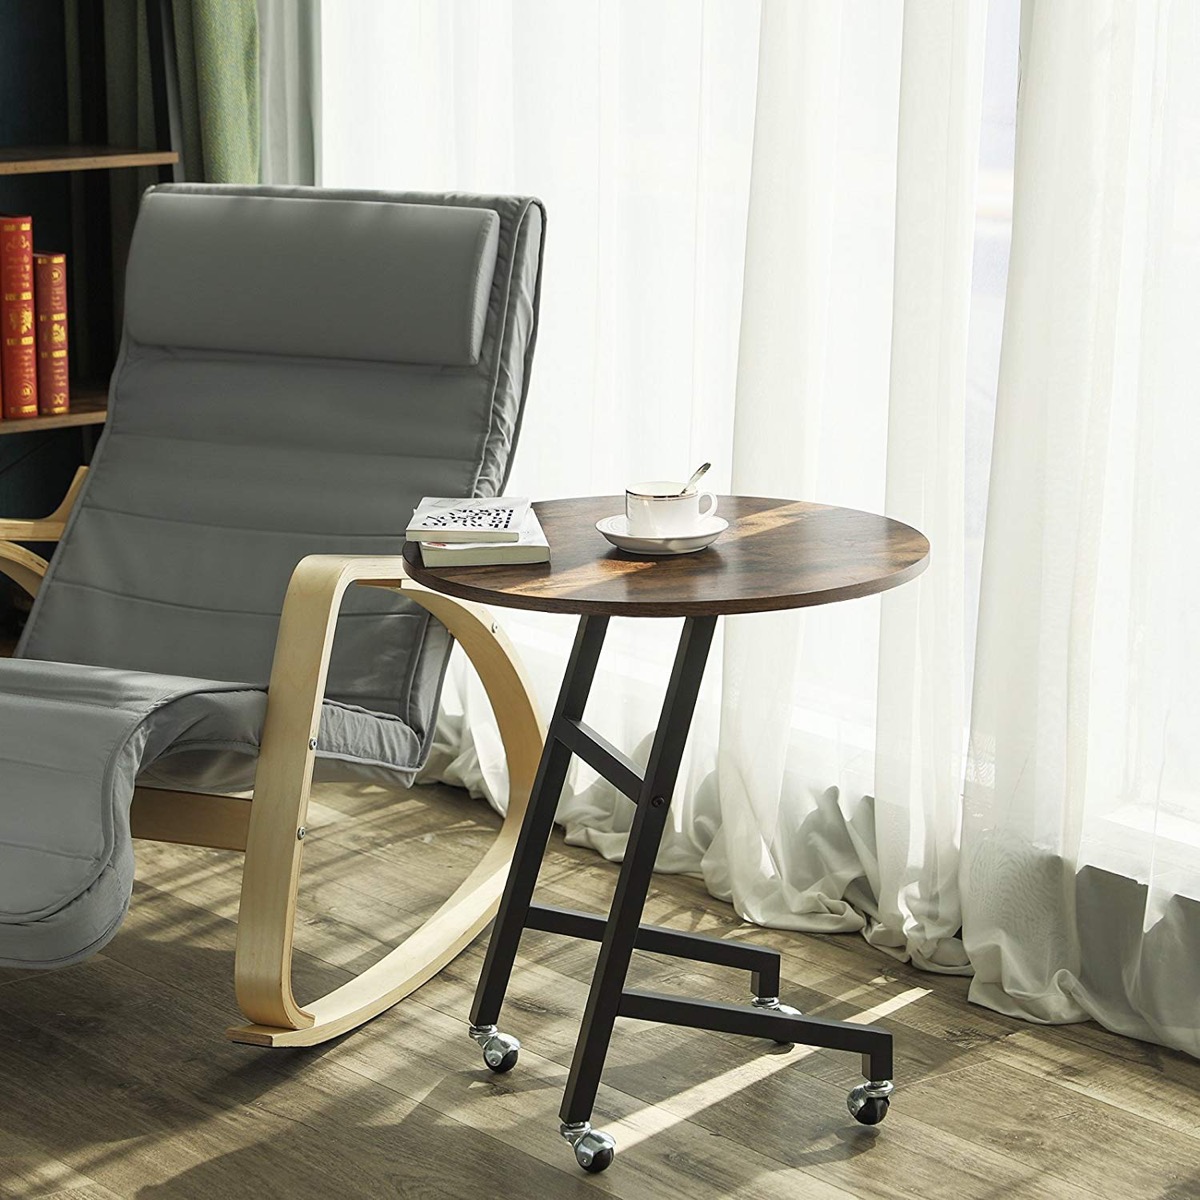 Wheels Round Rolling Table, Small Round Table On Wheels